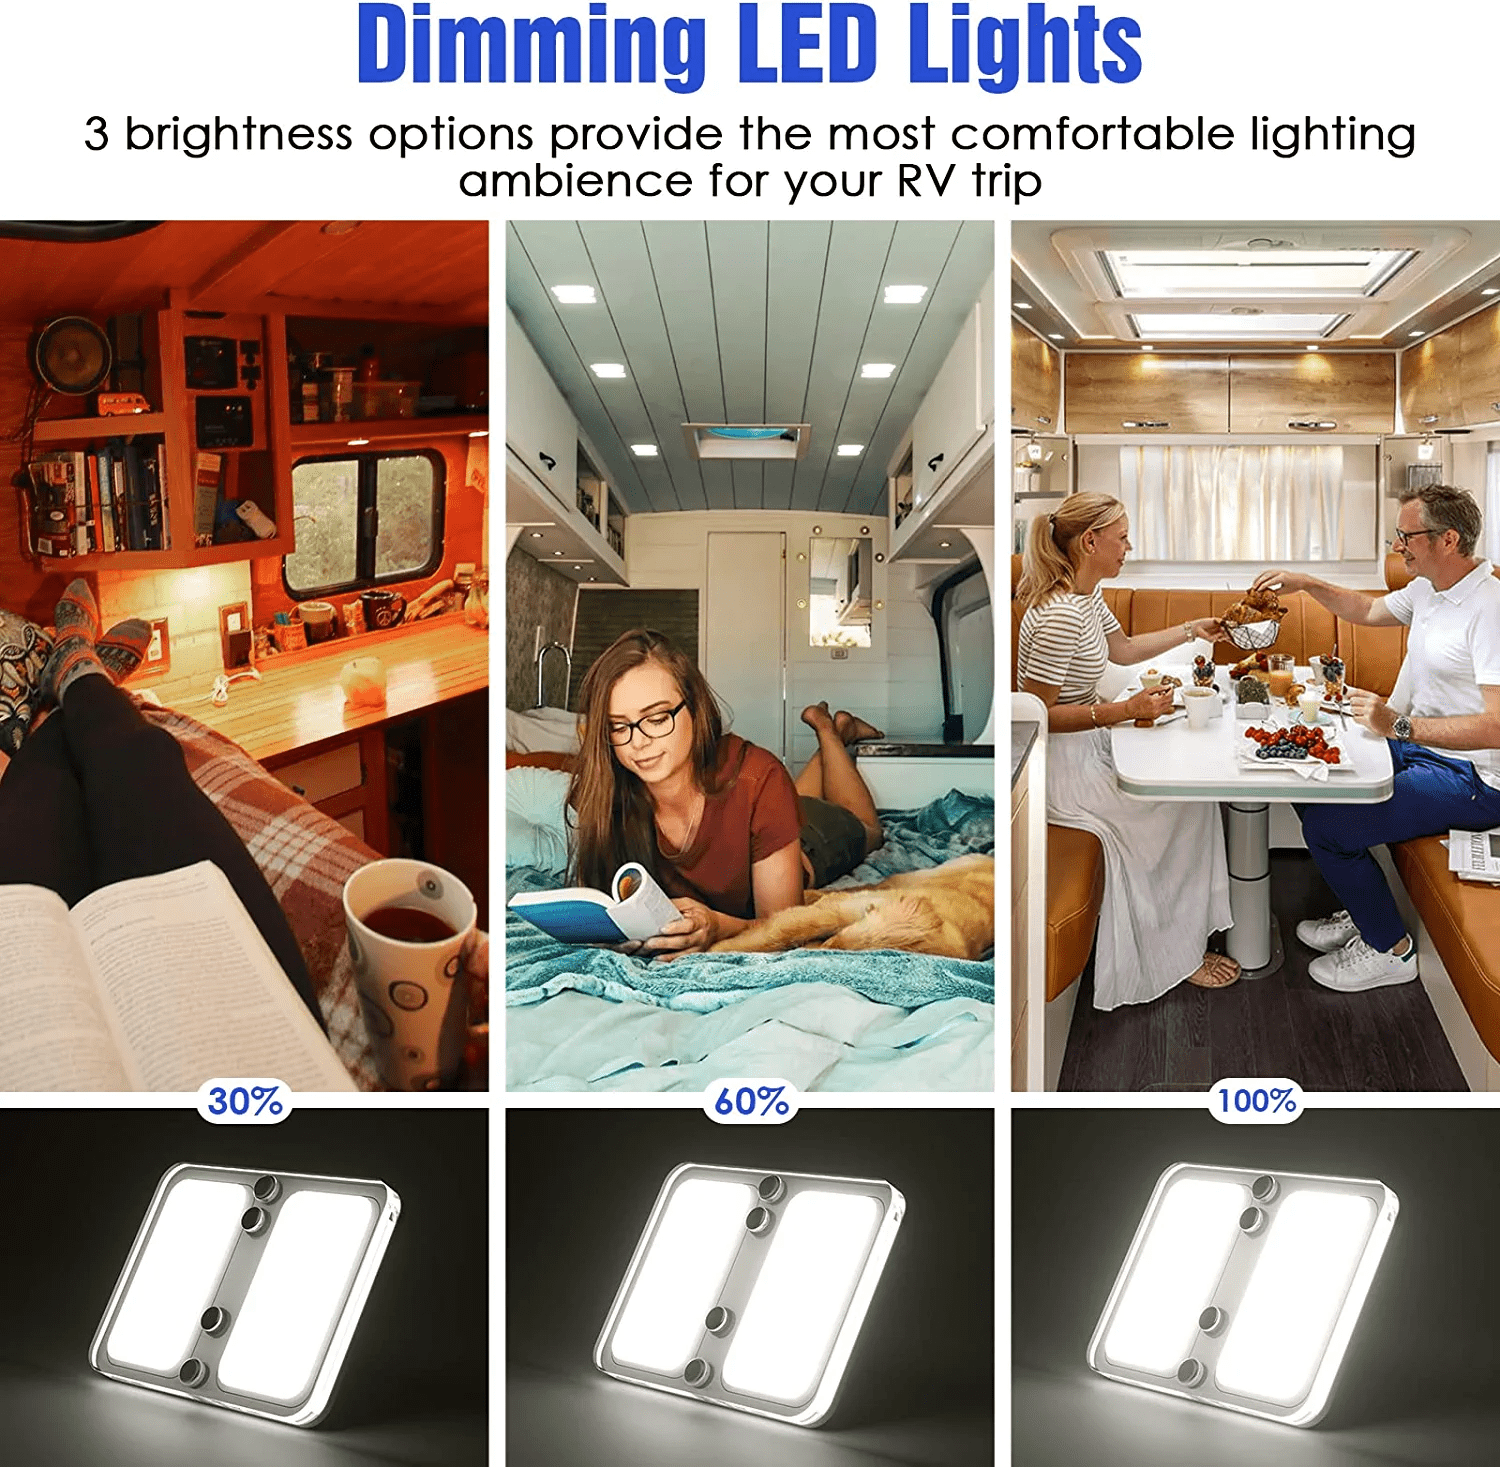 RISTOW RV LED Interior Lights 12-18V 2 Pack Dimmable Ceiling Light